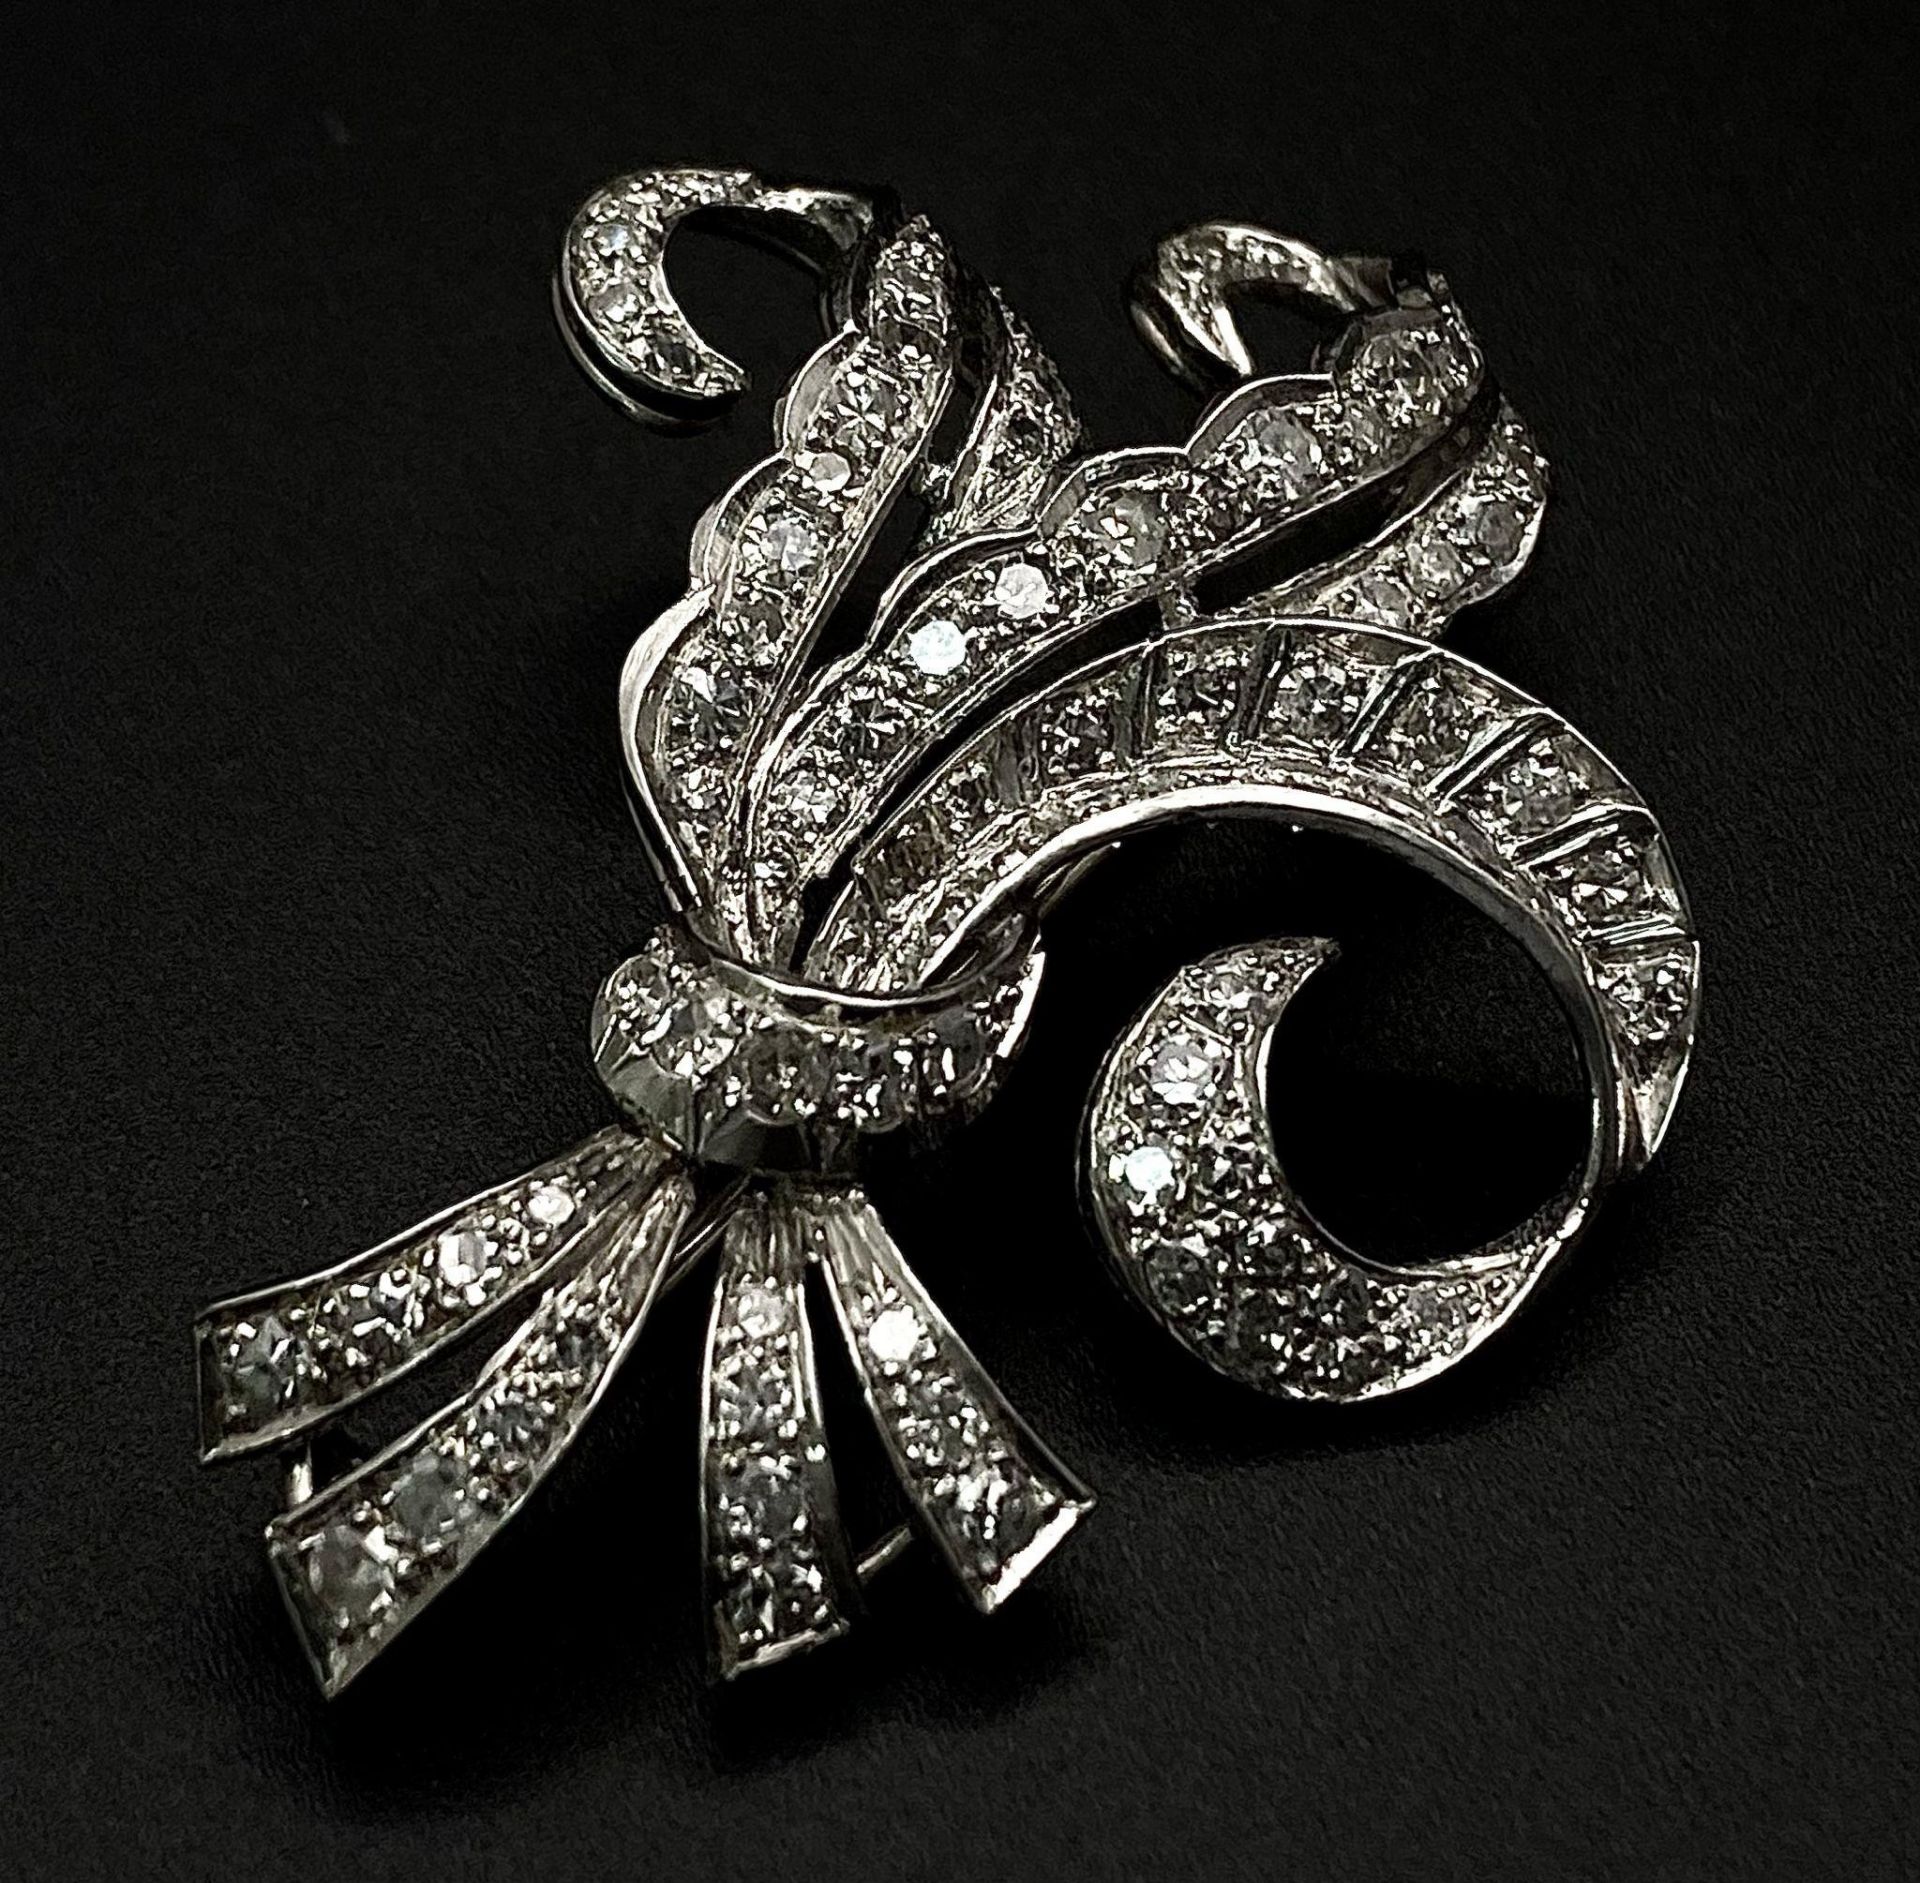 A Vintage Style Platinum and Diamond Elaborate Bow Brooch. 2.2ctw of encrusted diamonds. 10.7g total - Image 7 of 8